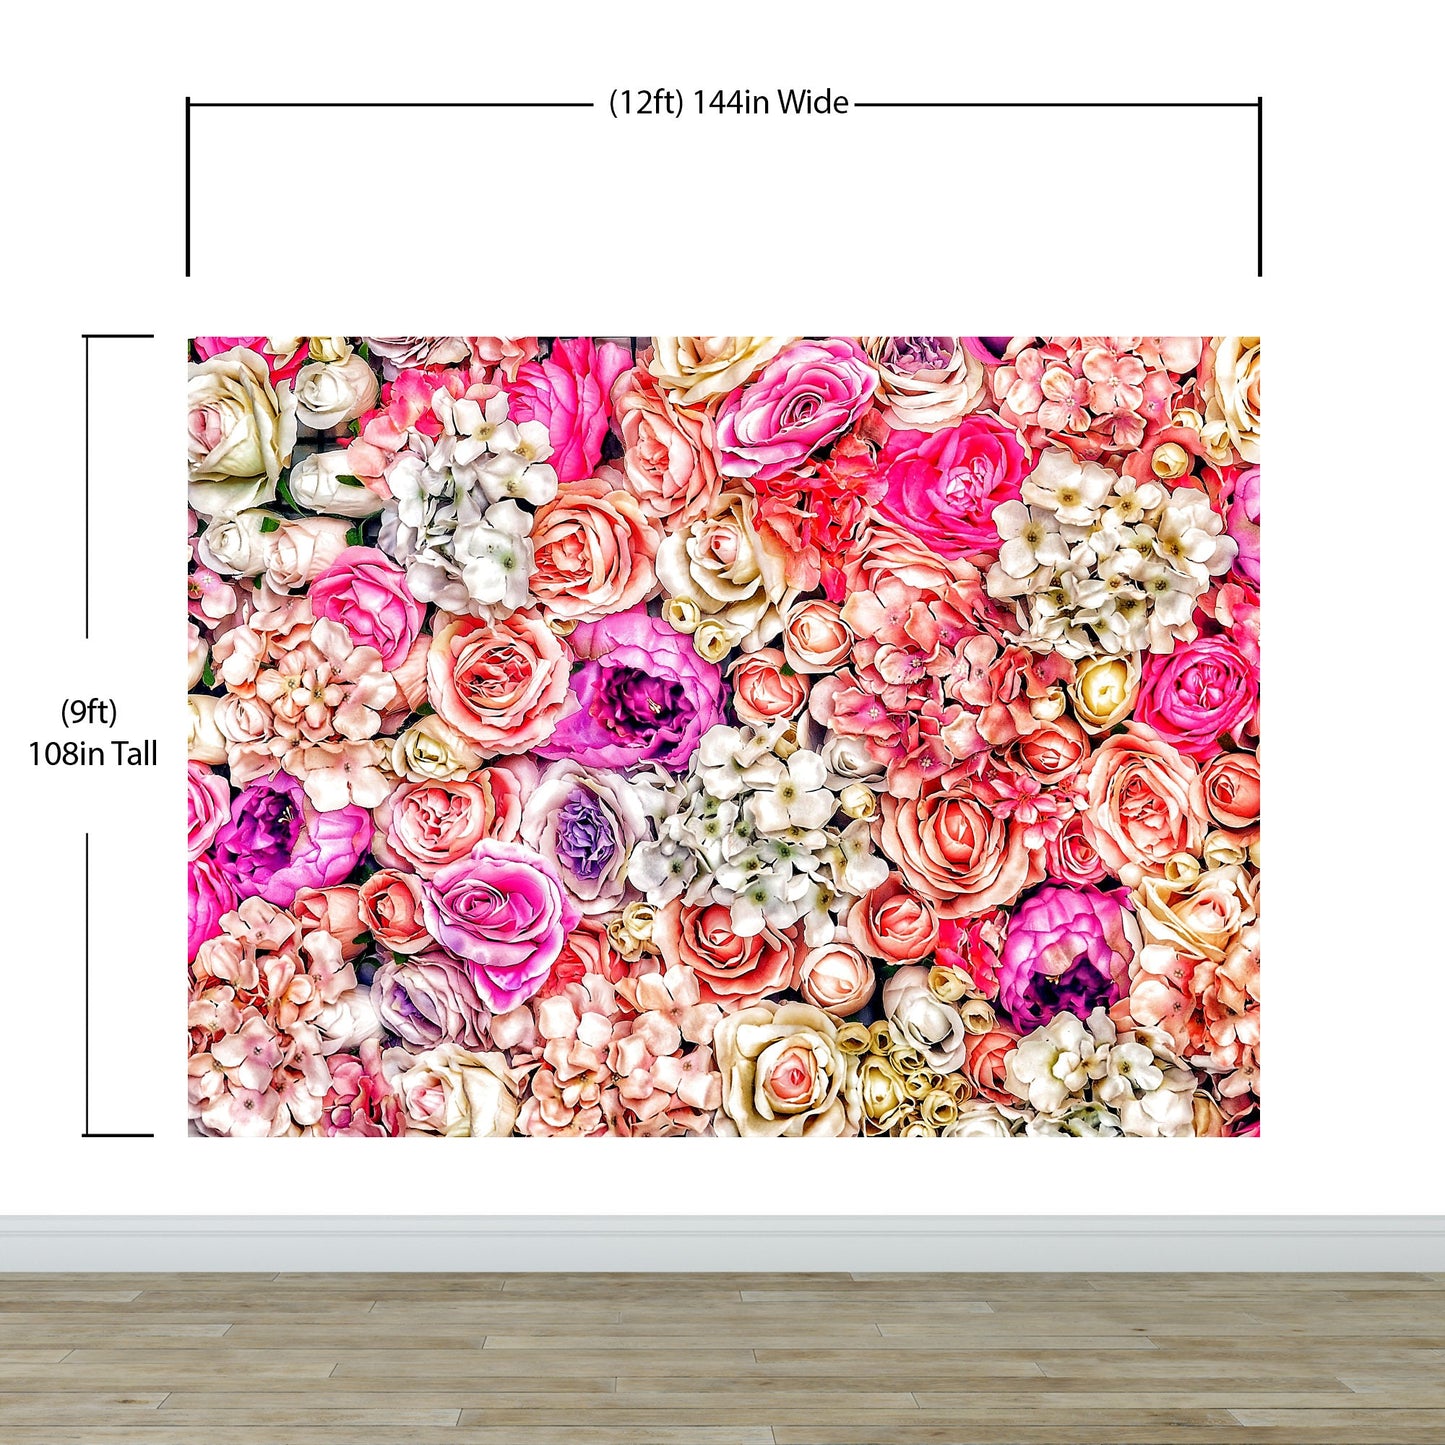 Vibrant Floral Bliss Wallpaper Mural - Colorful Roses and Flower Arrangements #6602